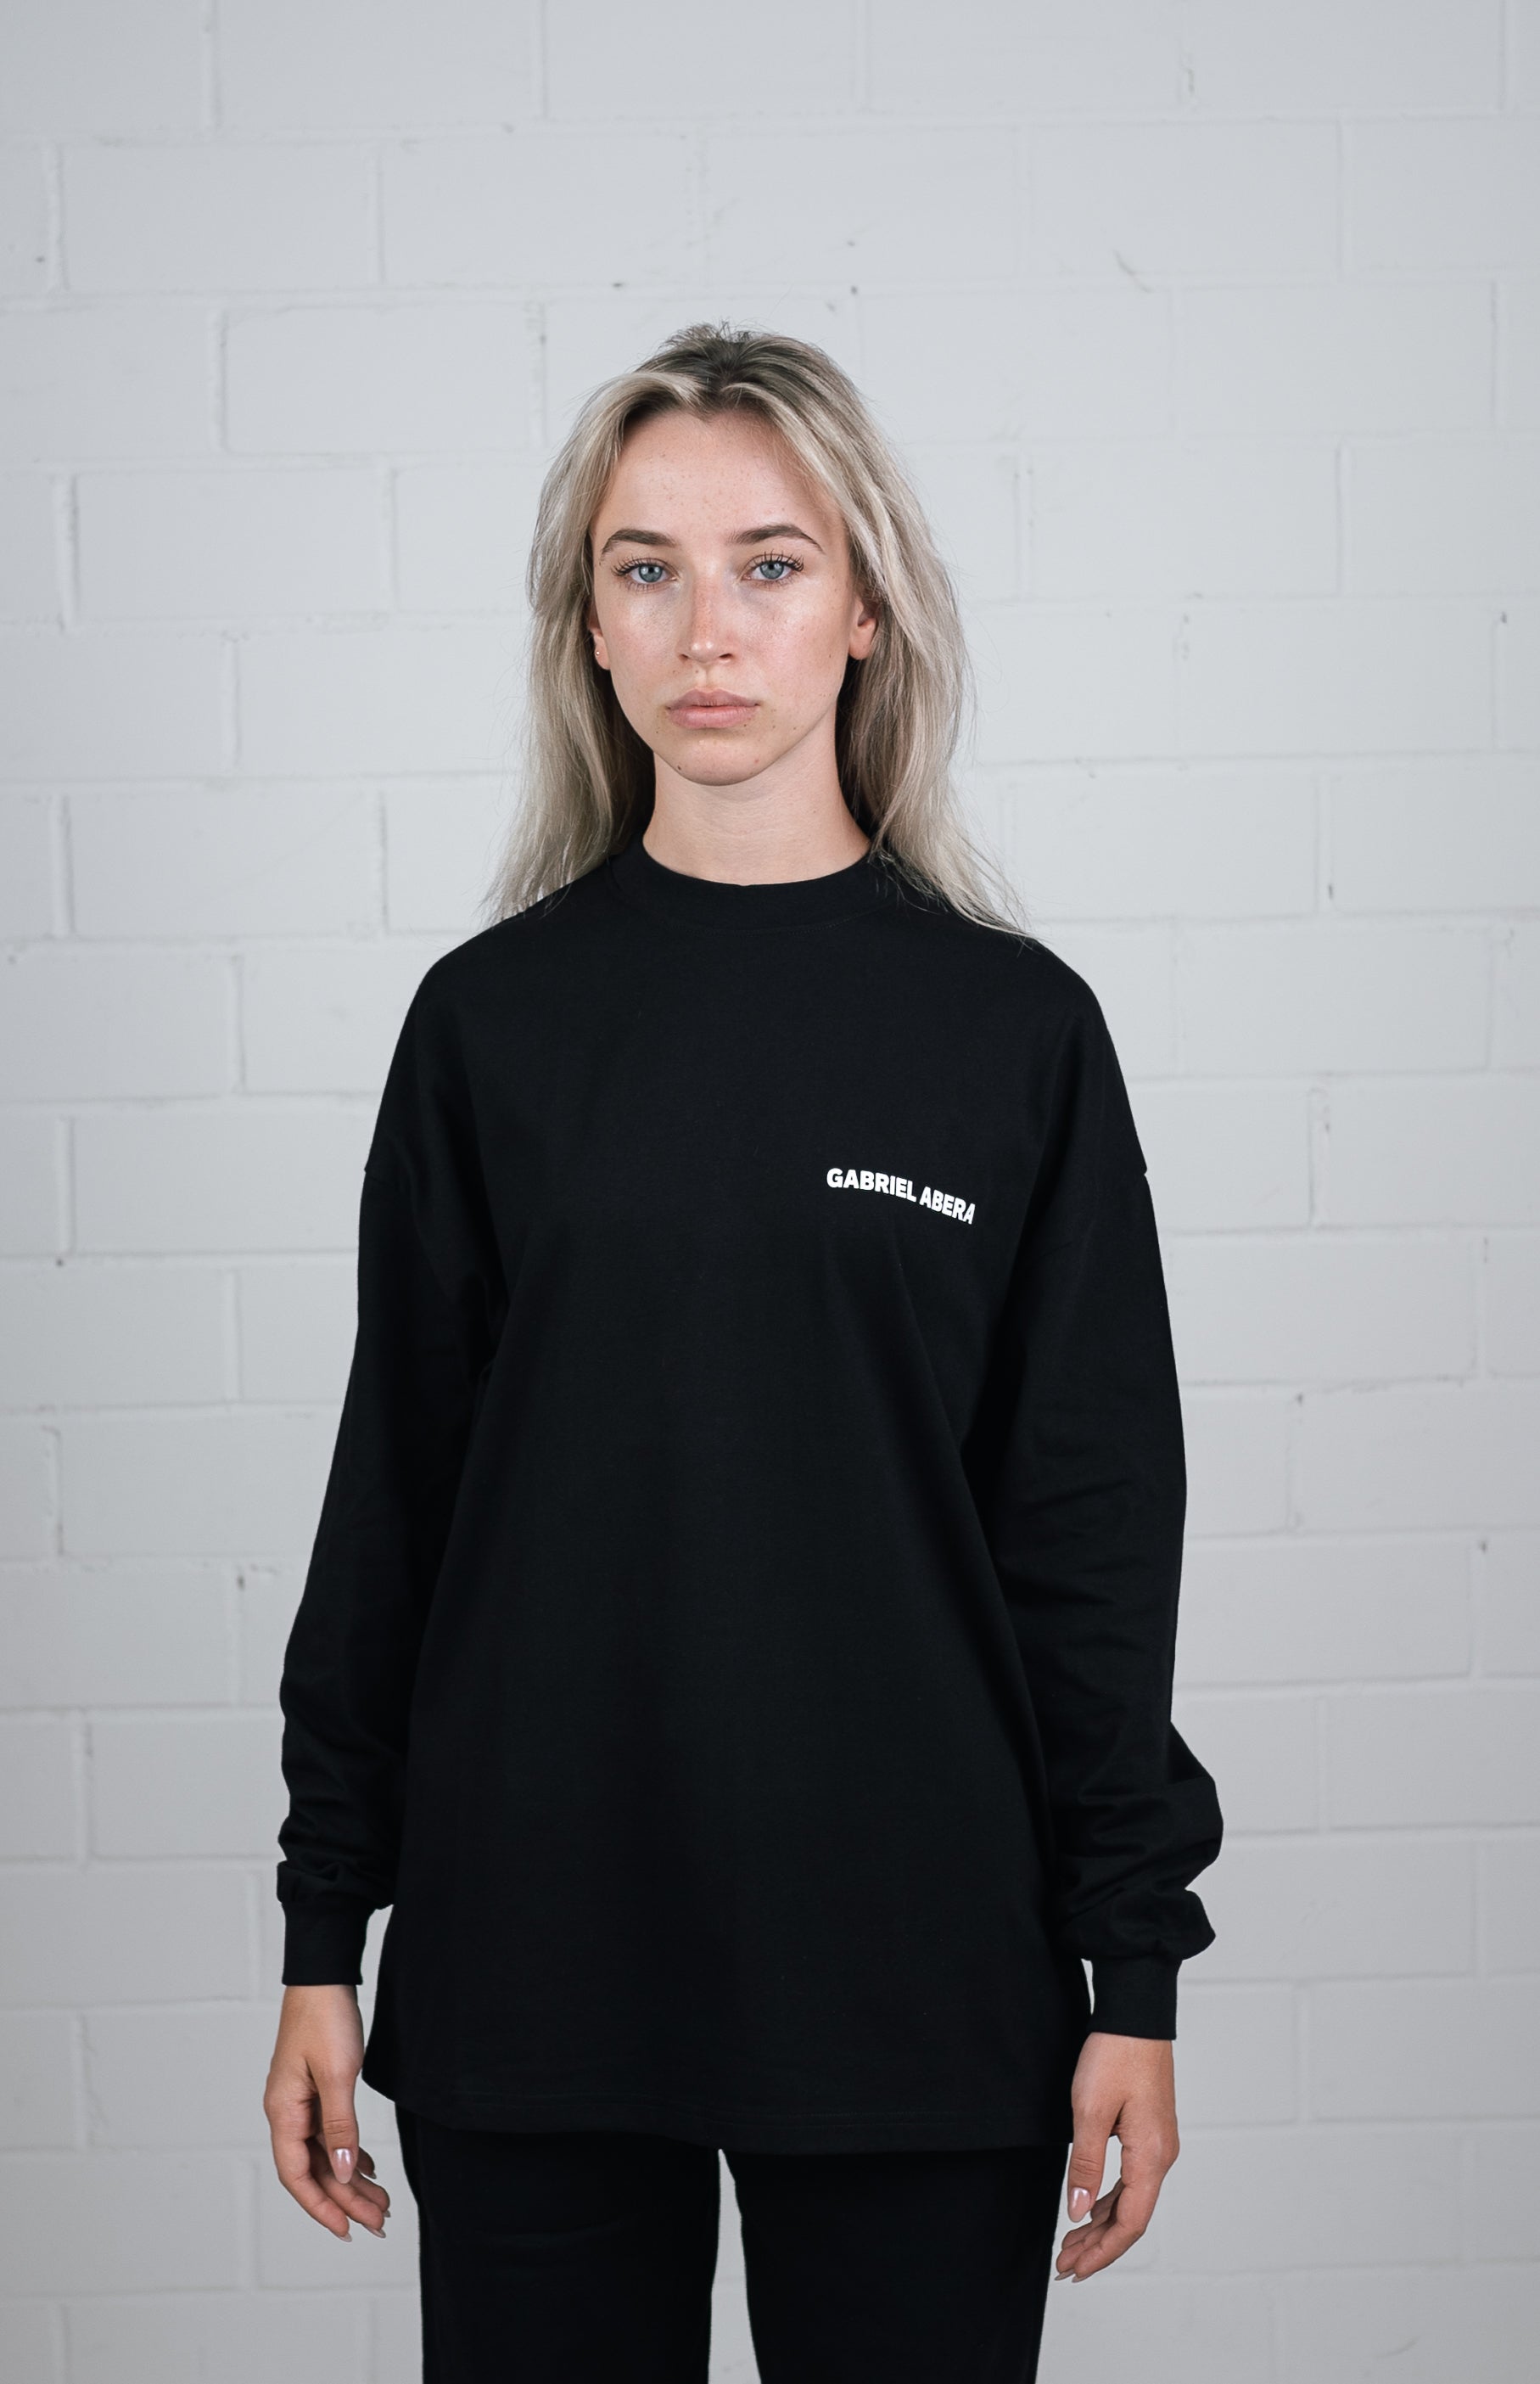 Front View Black Long sleeve worn by female model